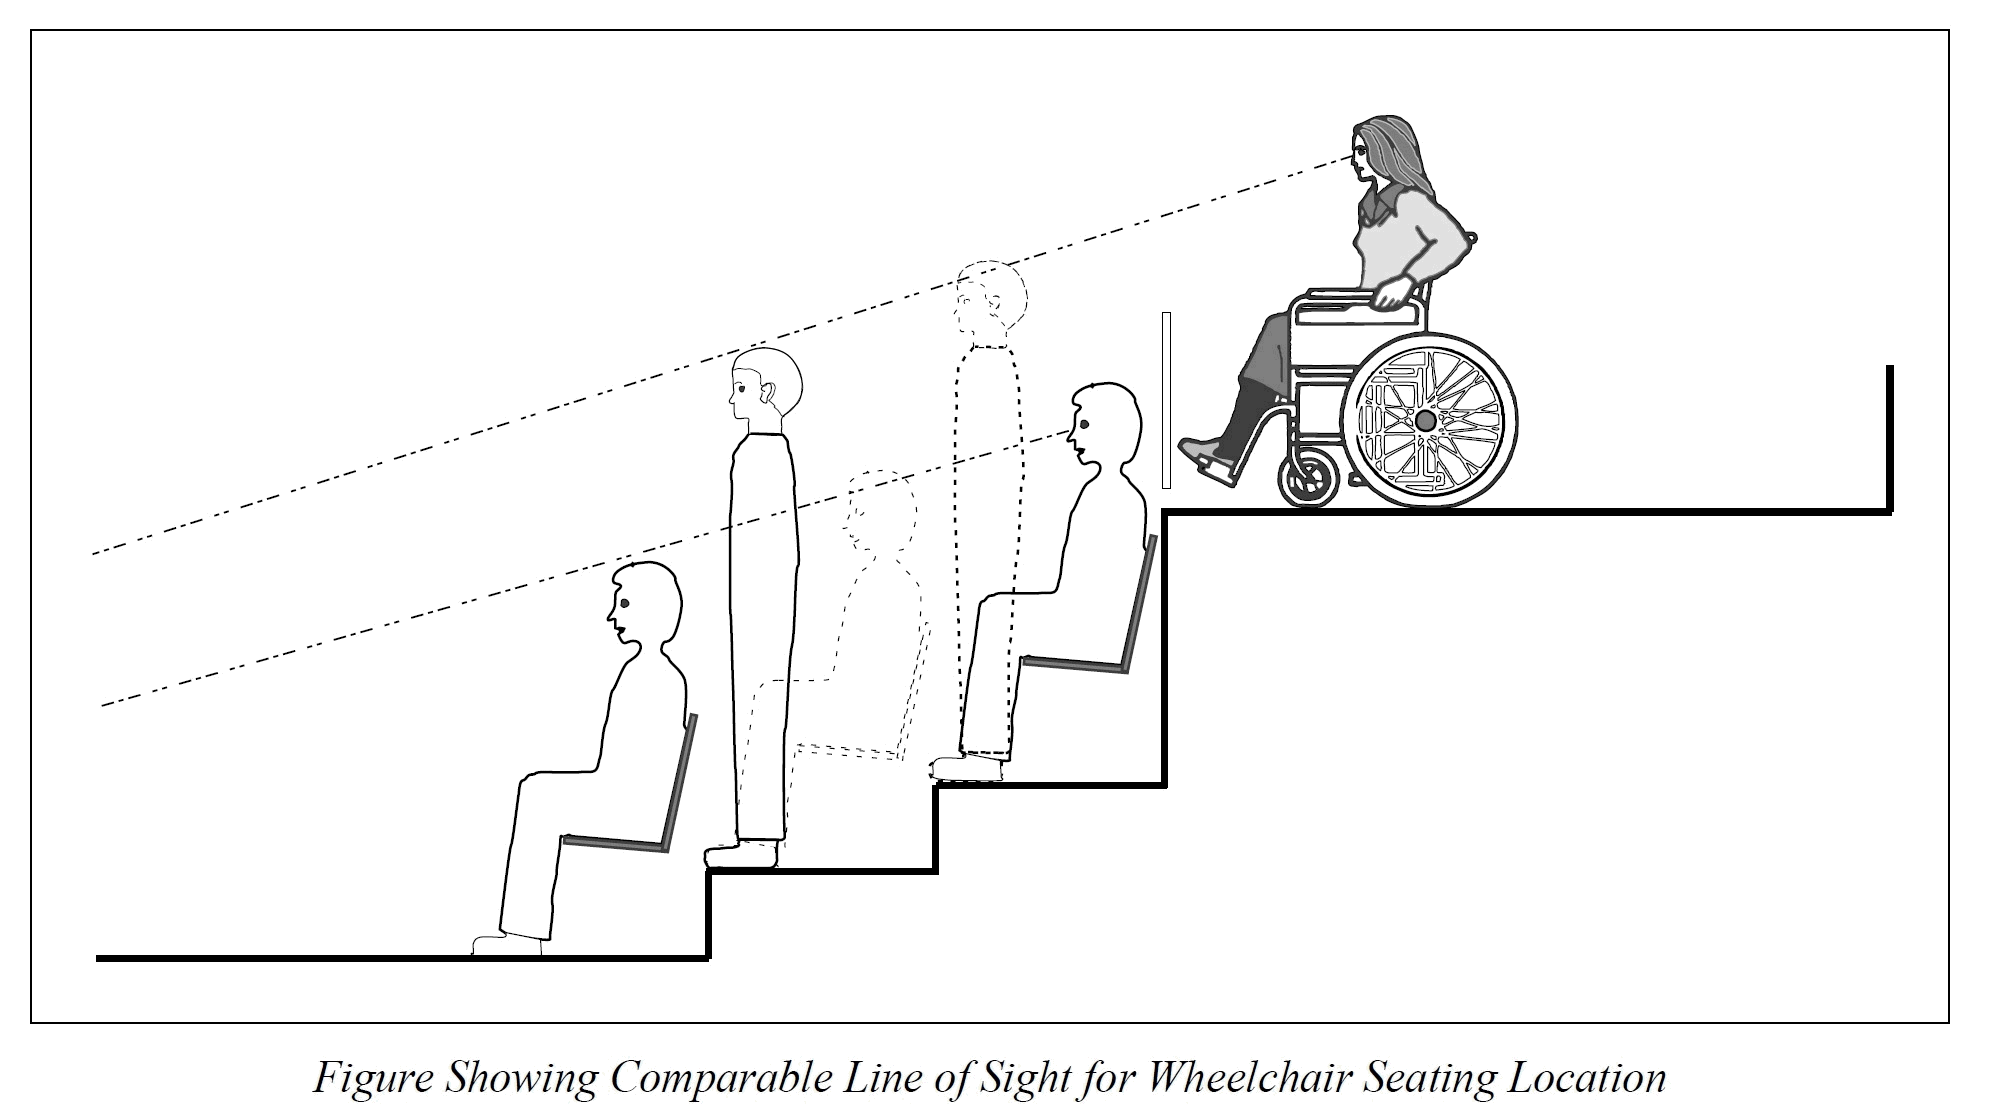 Figure showing comparable line of sight for Wheelchair seating location